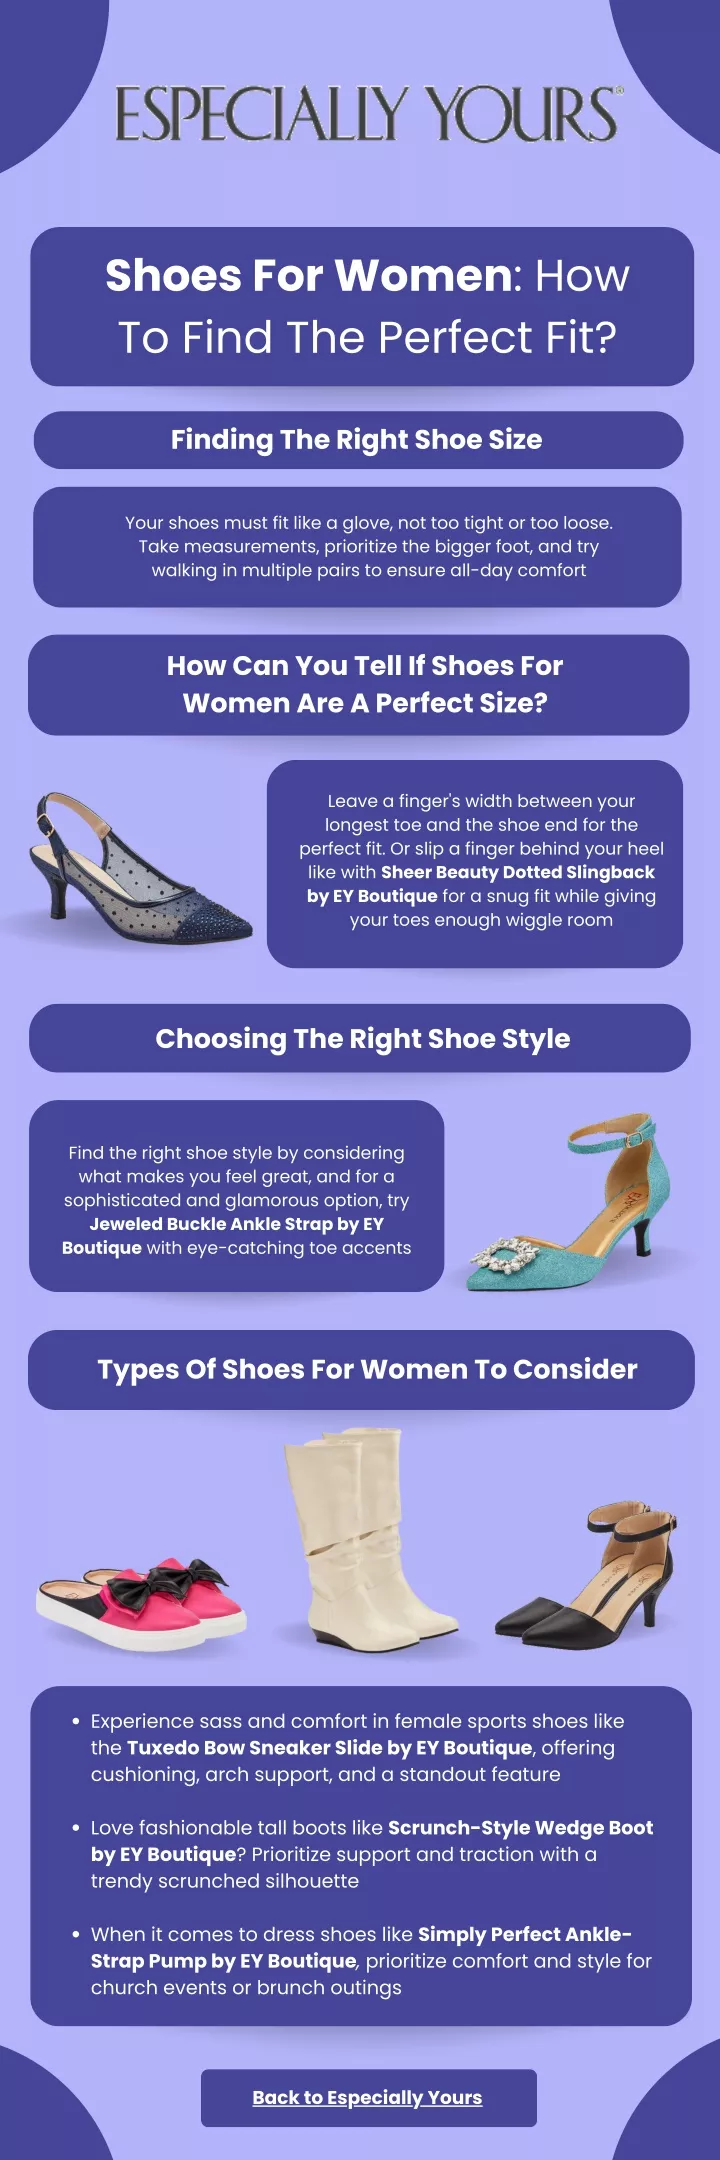 shoes for women how to find the perfect fit